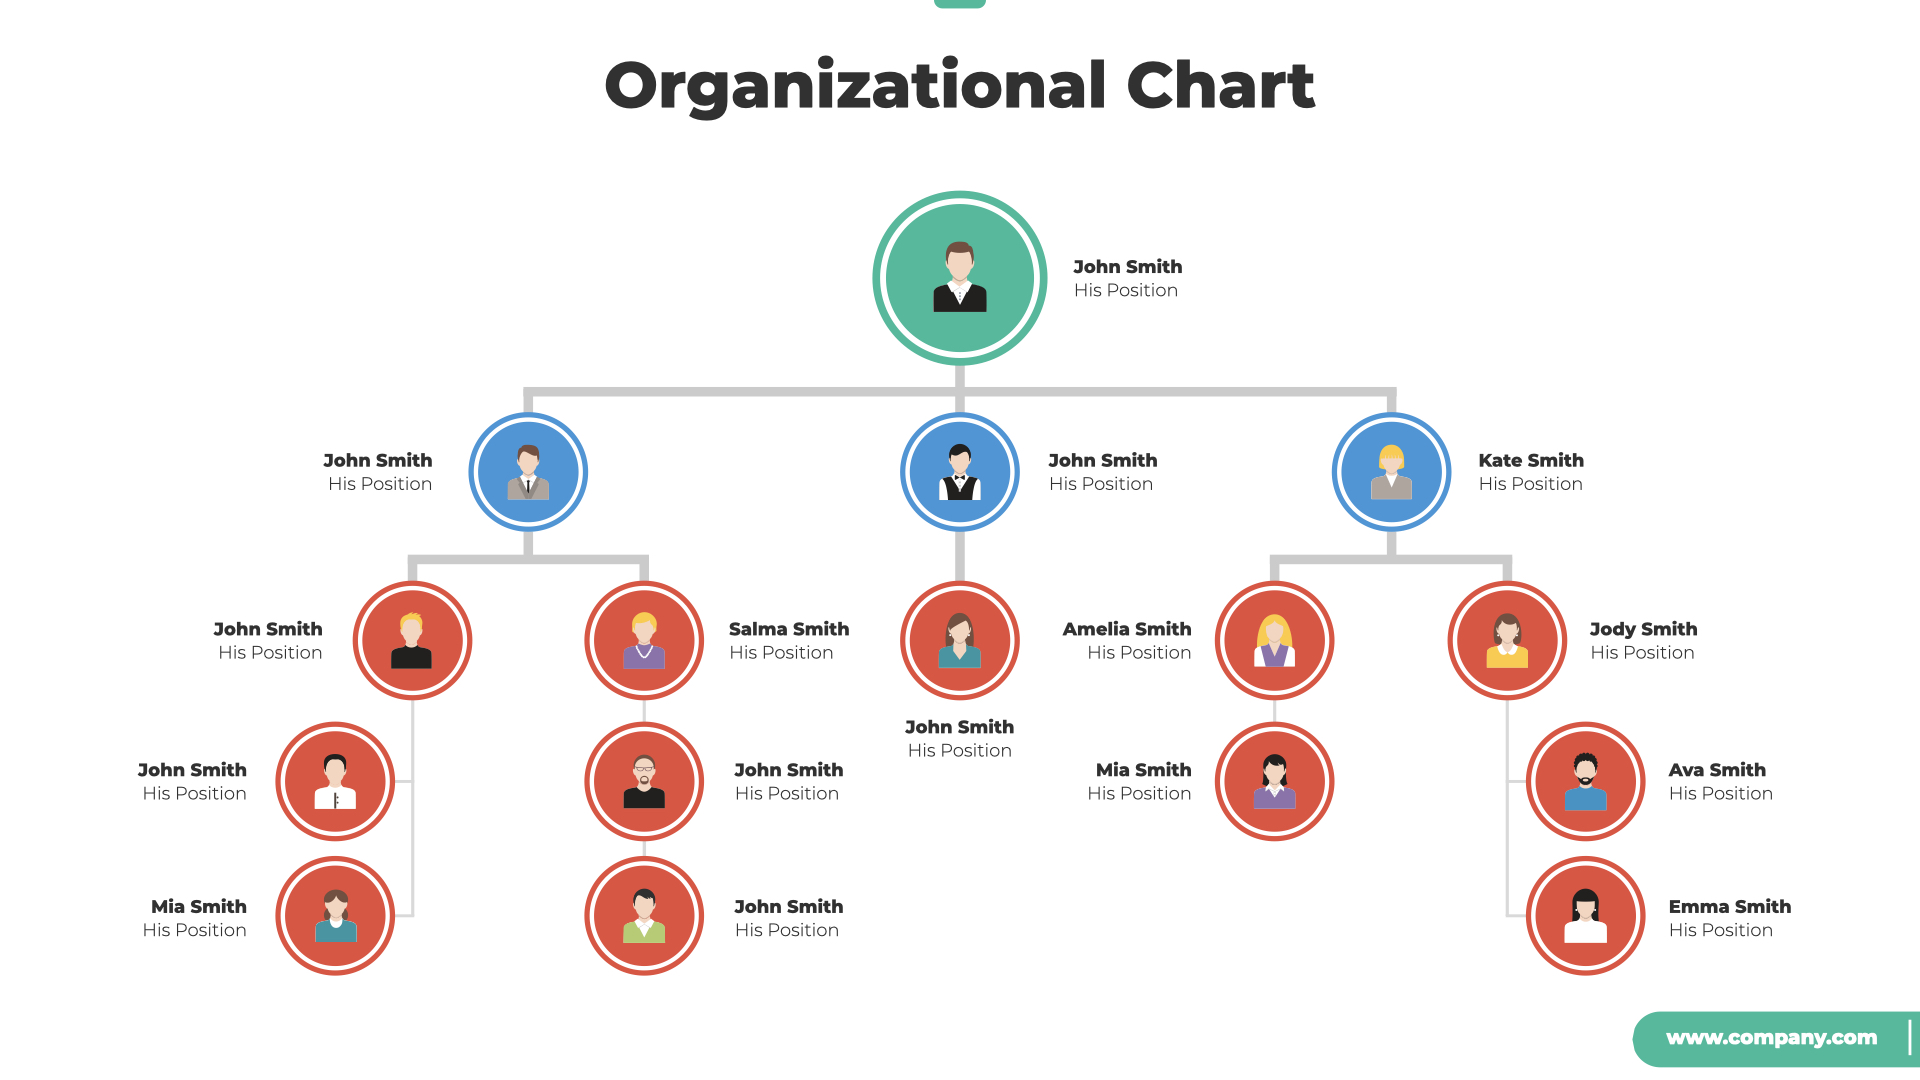 Organizational Chart and Hierarchy Keynote Template by Spriteit